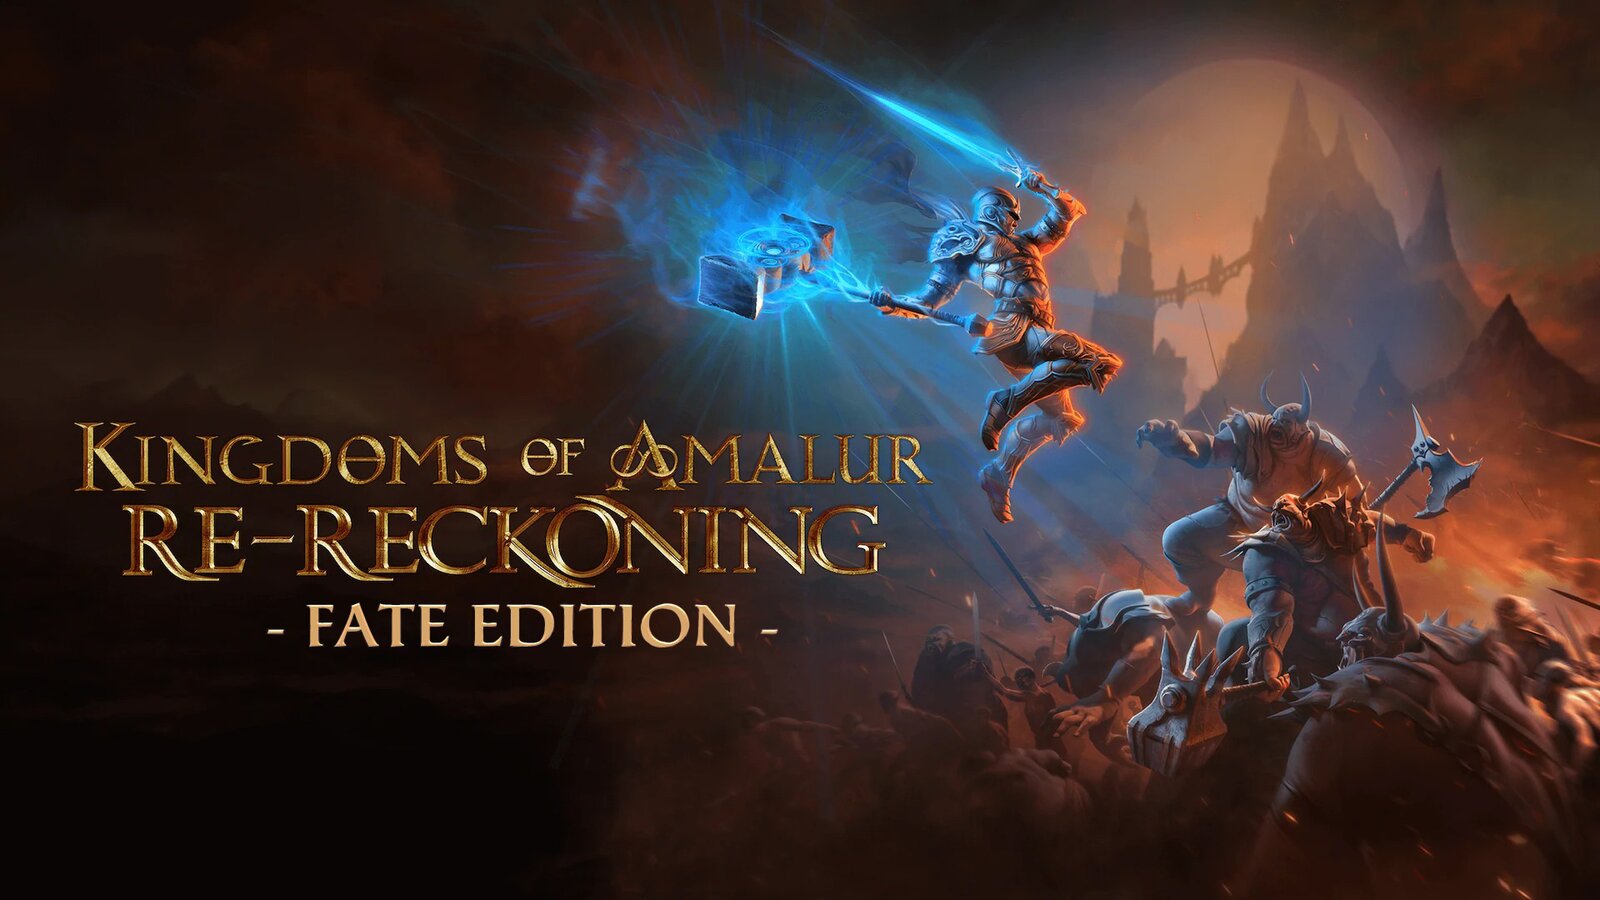 Kingdoms of Amalur: Re-Reckoning - Fate Edition